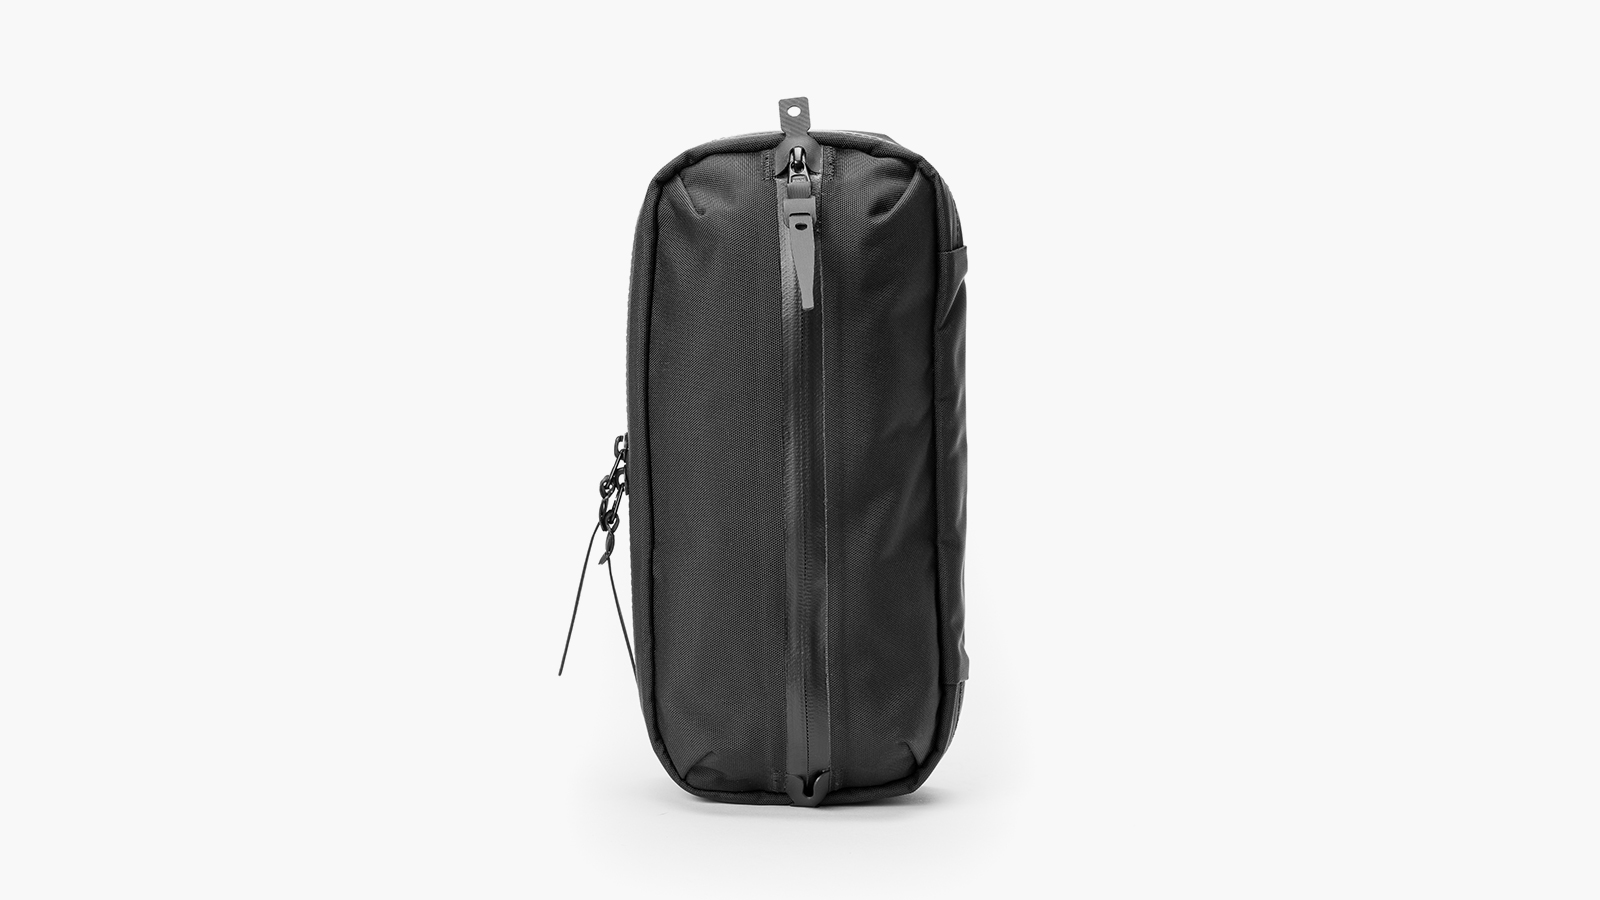 The Black Ember TKS Waterproof Sling Has Room For All Your Essentials ...